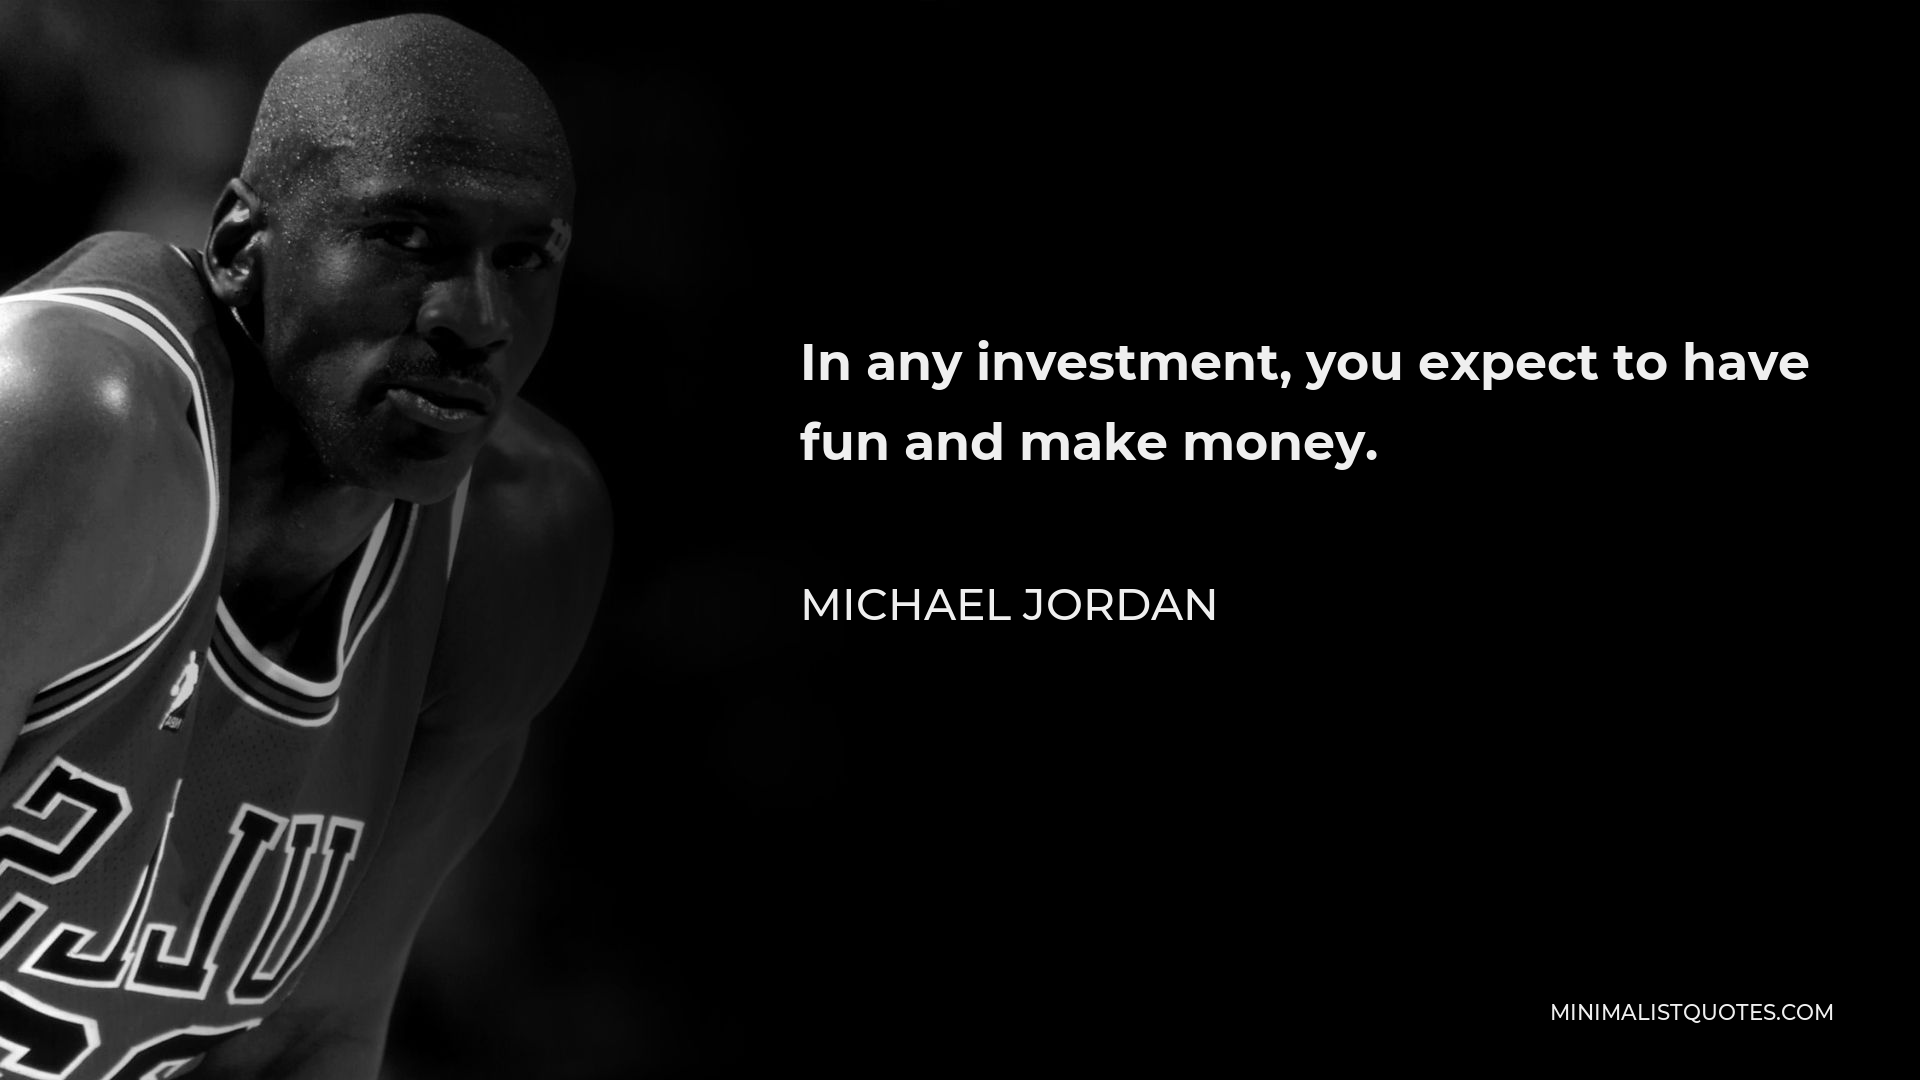 Michael Jordan Quote - In any investment, you expect to have fun and make money.